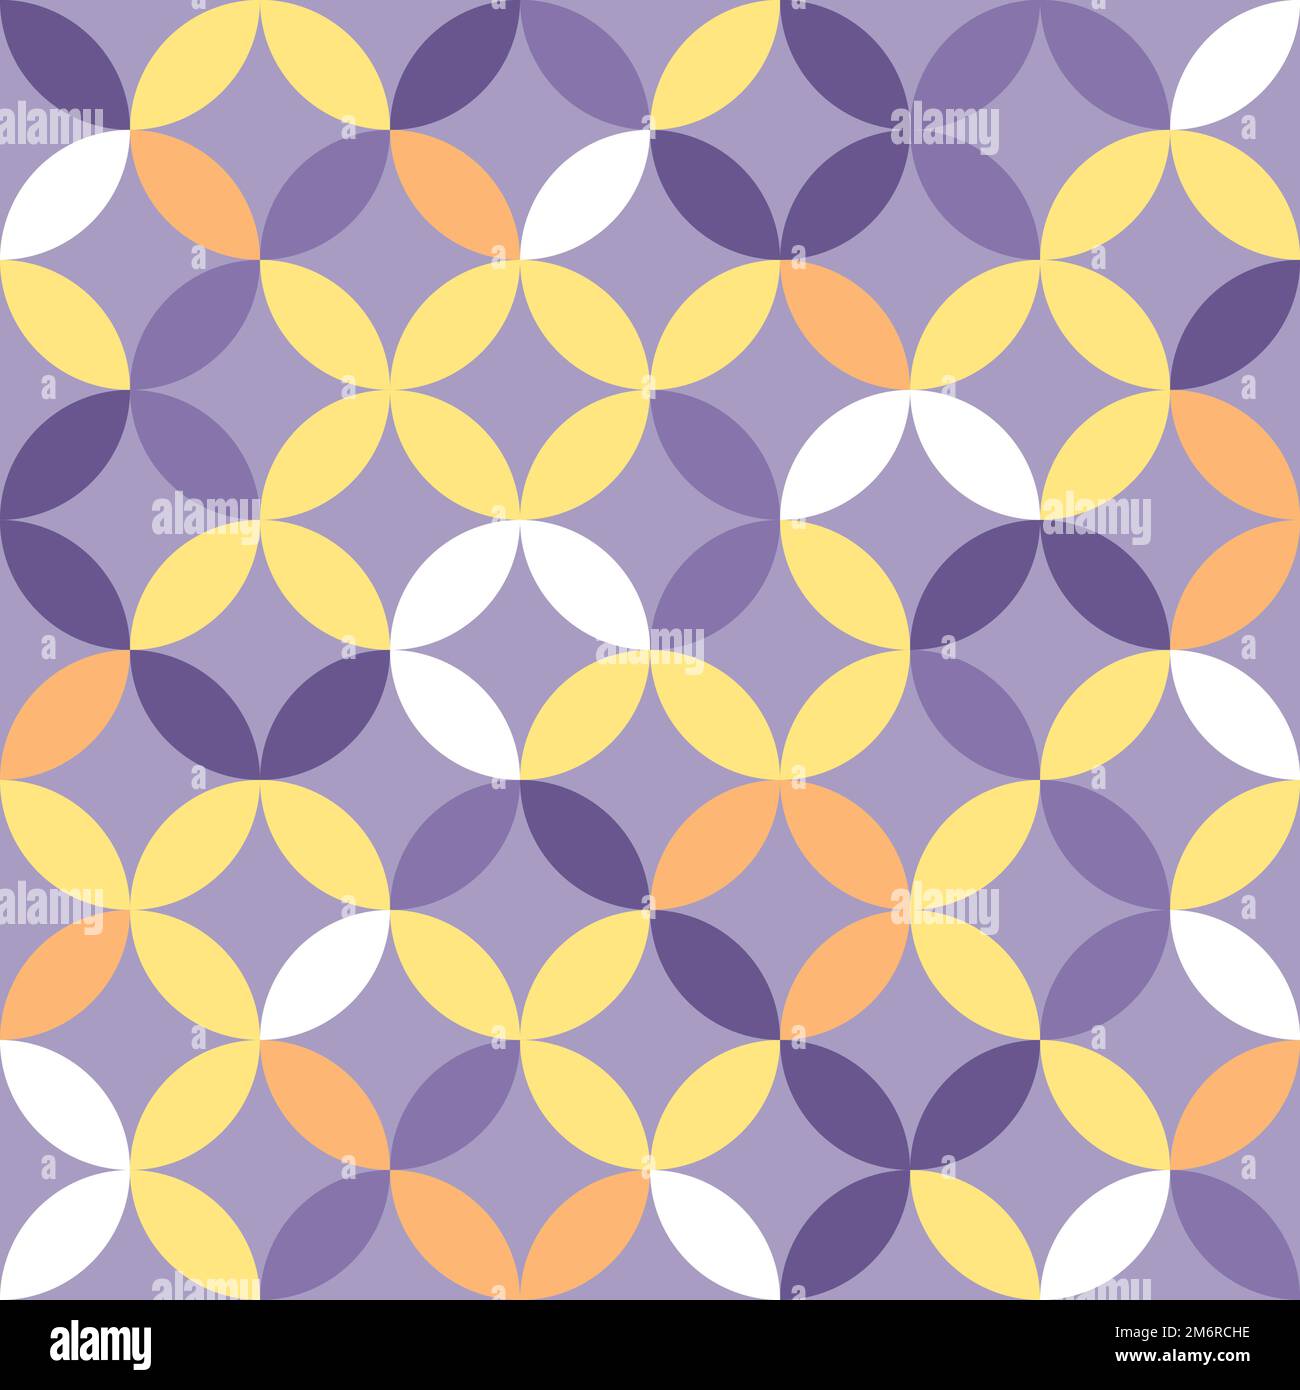 Violet and yellow geometric pattern. Overlapping circles and ovals abstract retro fashion texture. Seamless pattern. Stock Vector